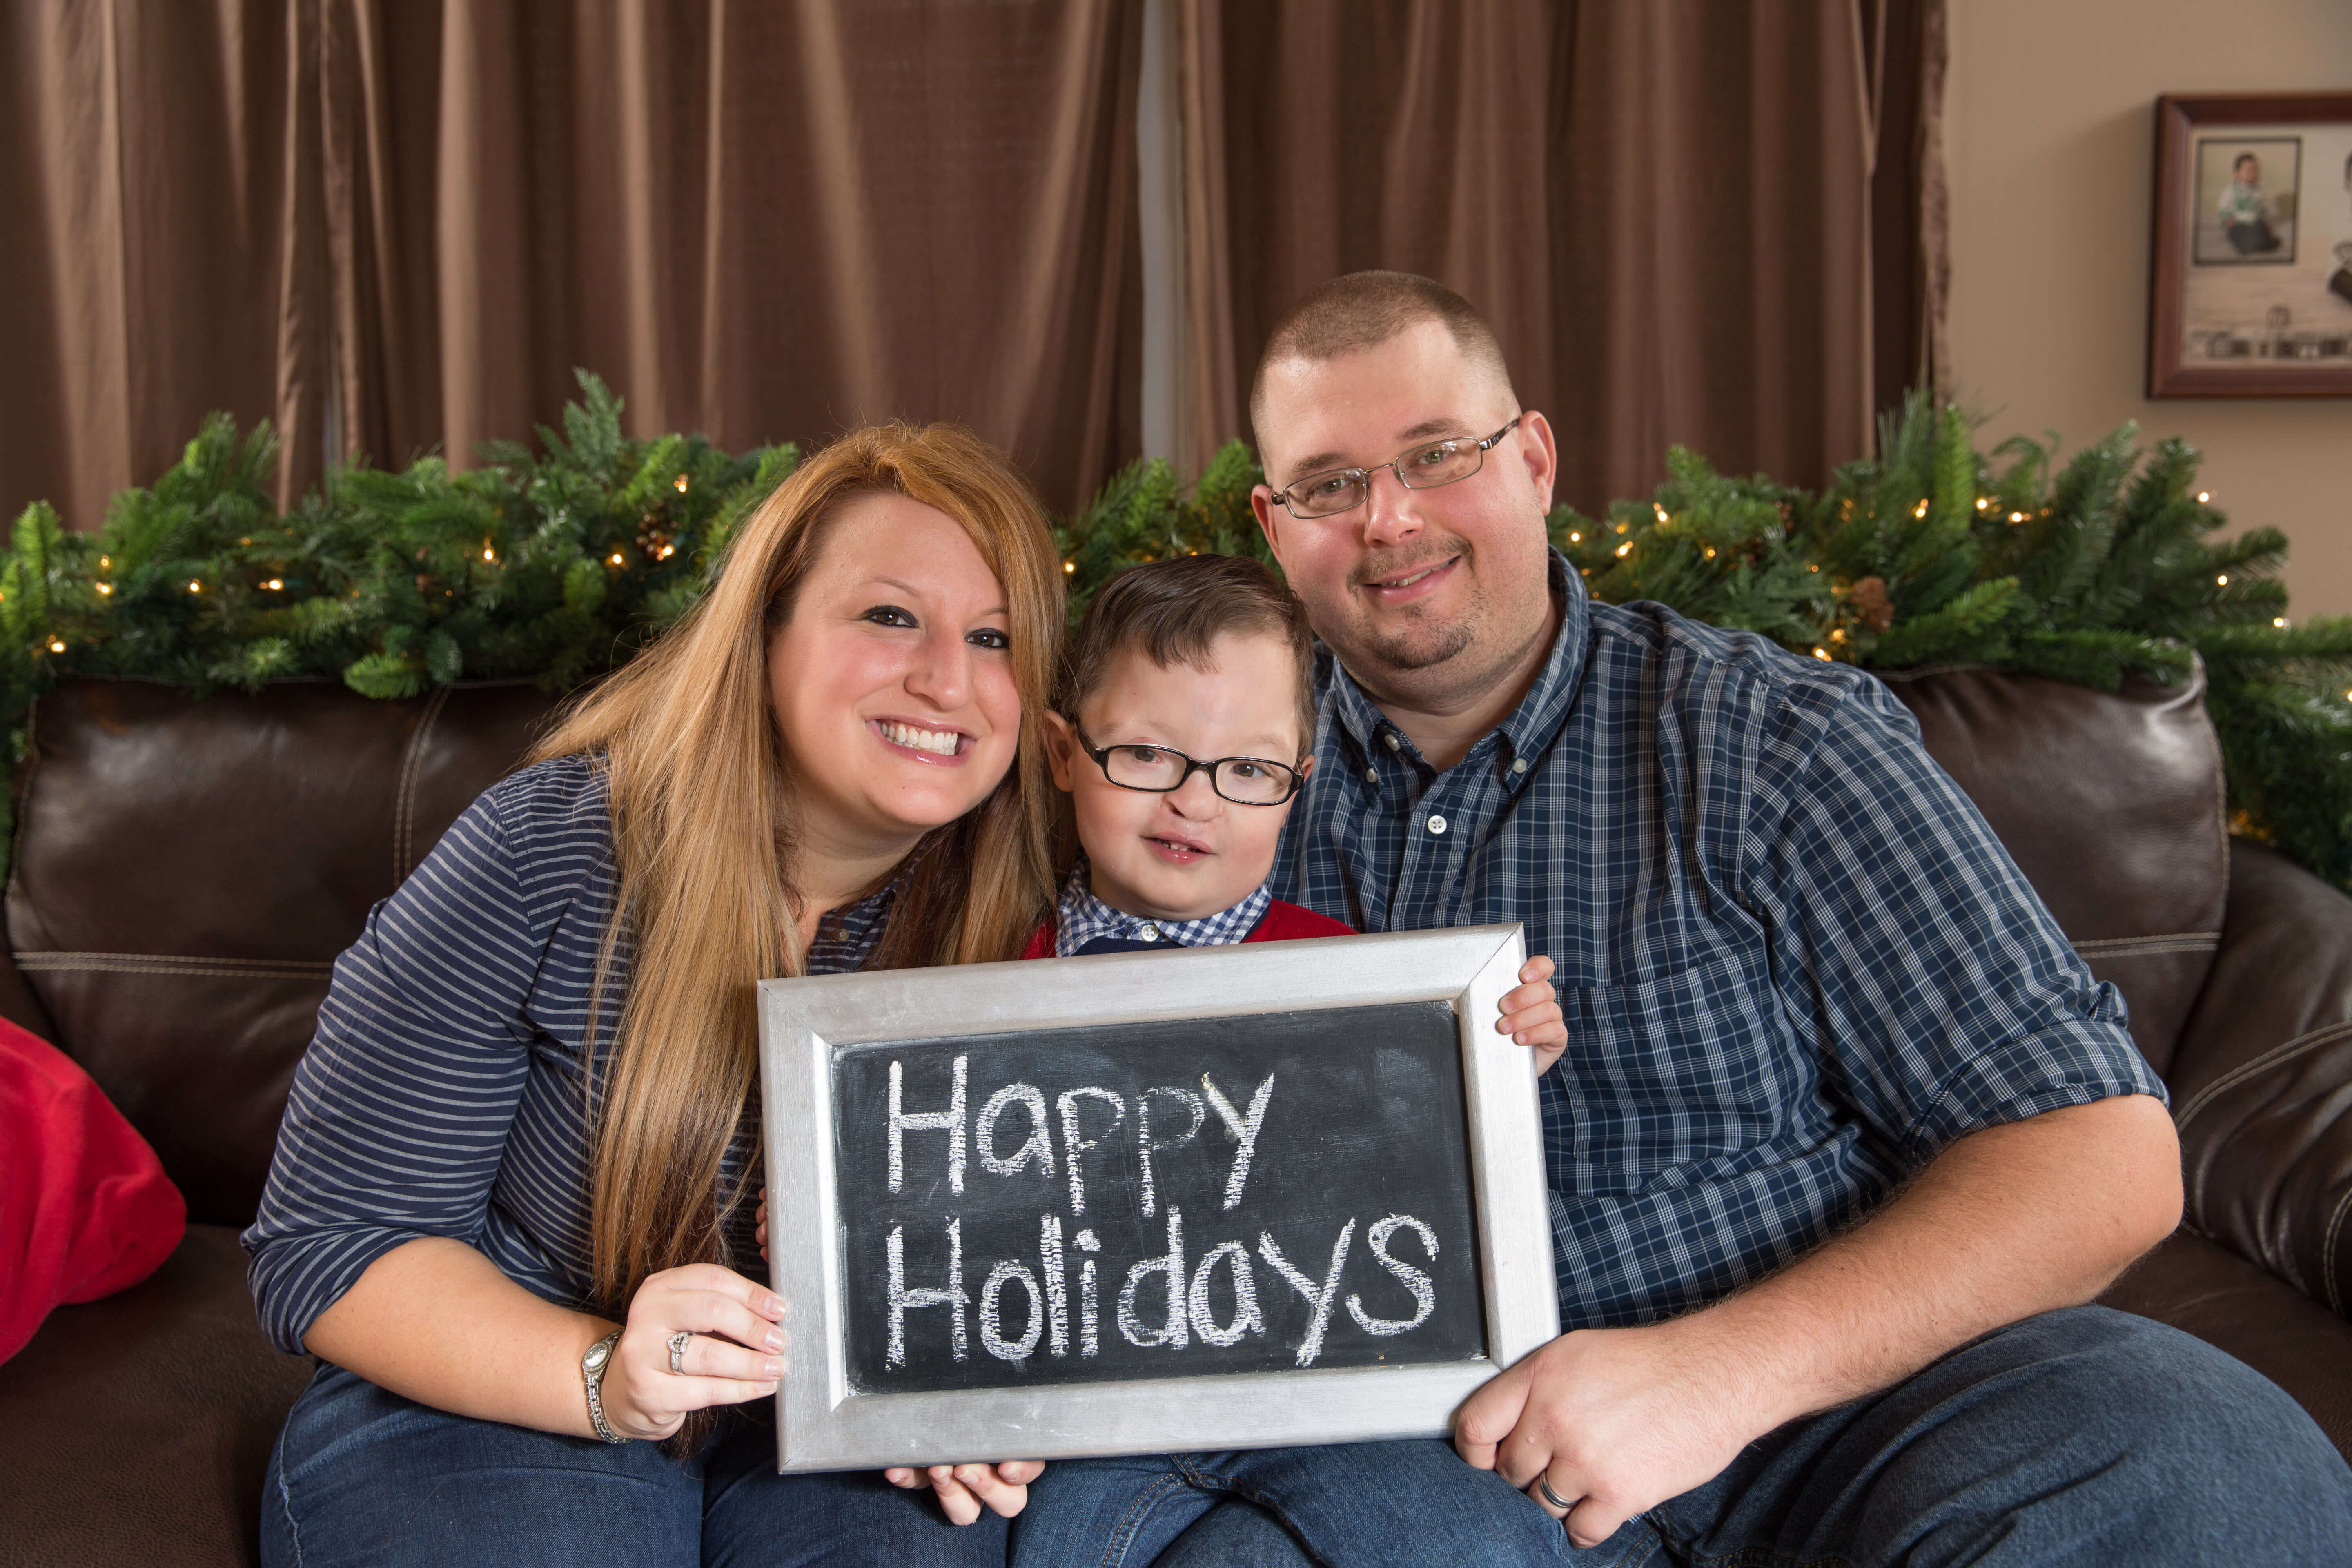 Having a special needs child in the family makes the holidays even brighter!